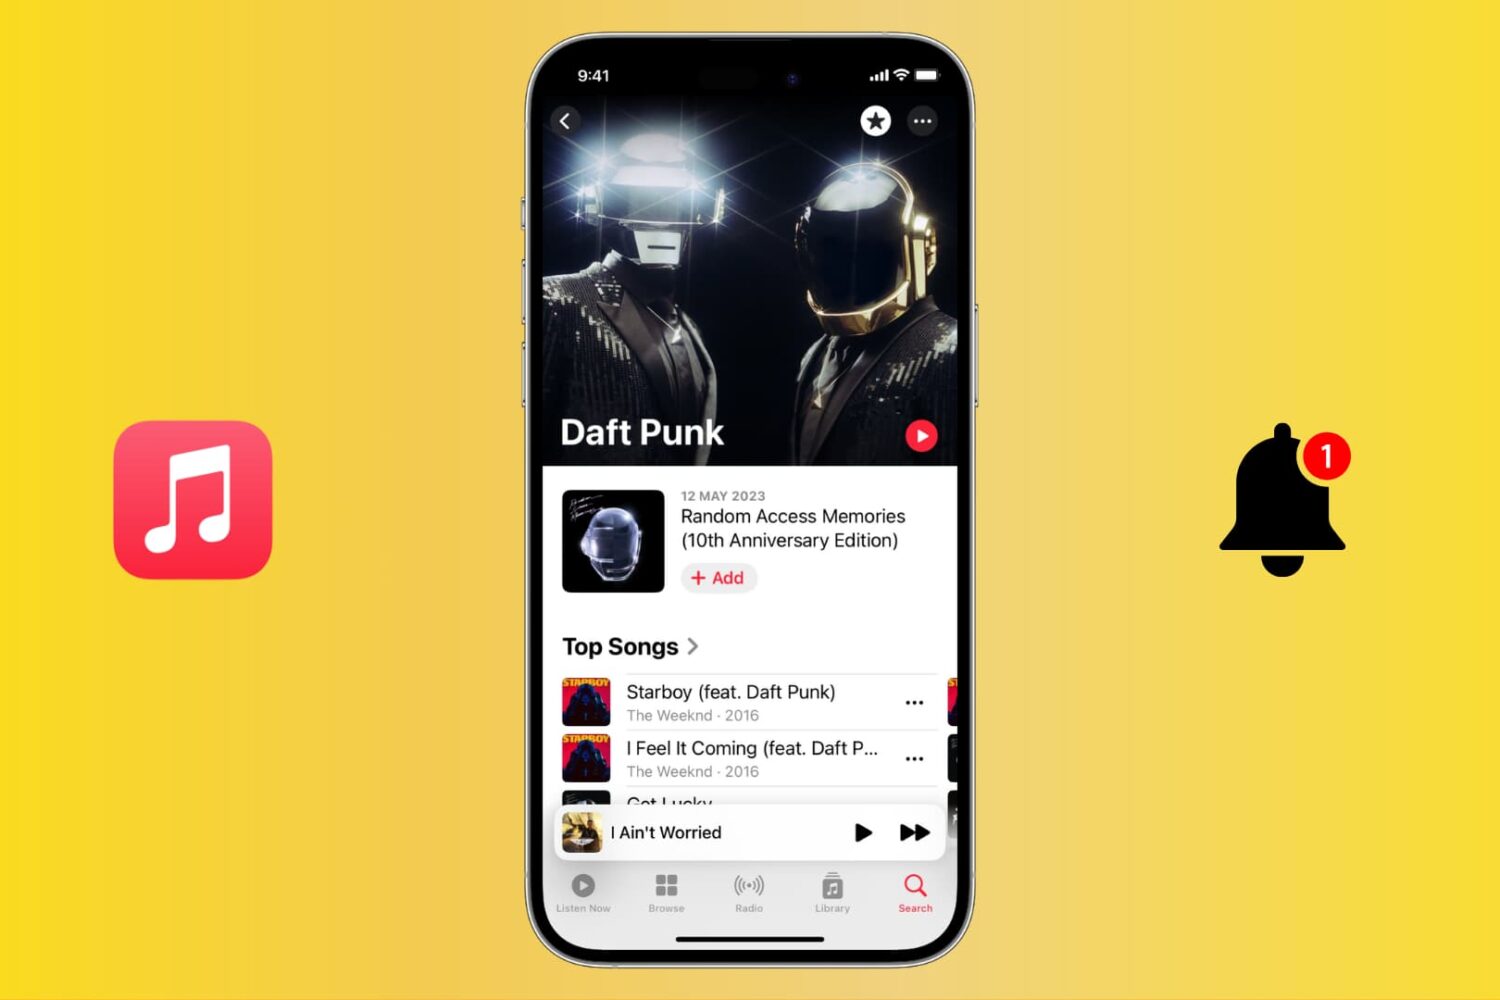 Get notified of new songs by your favorite artists on Apple Music